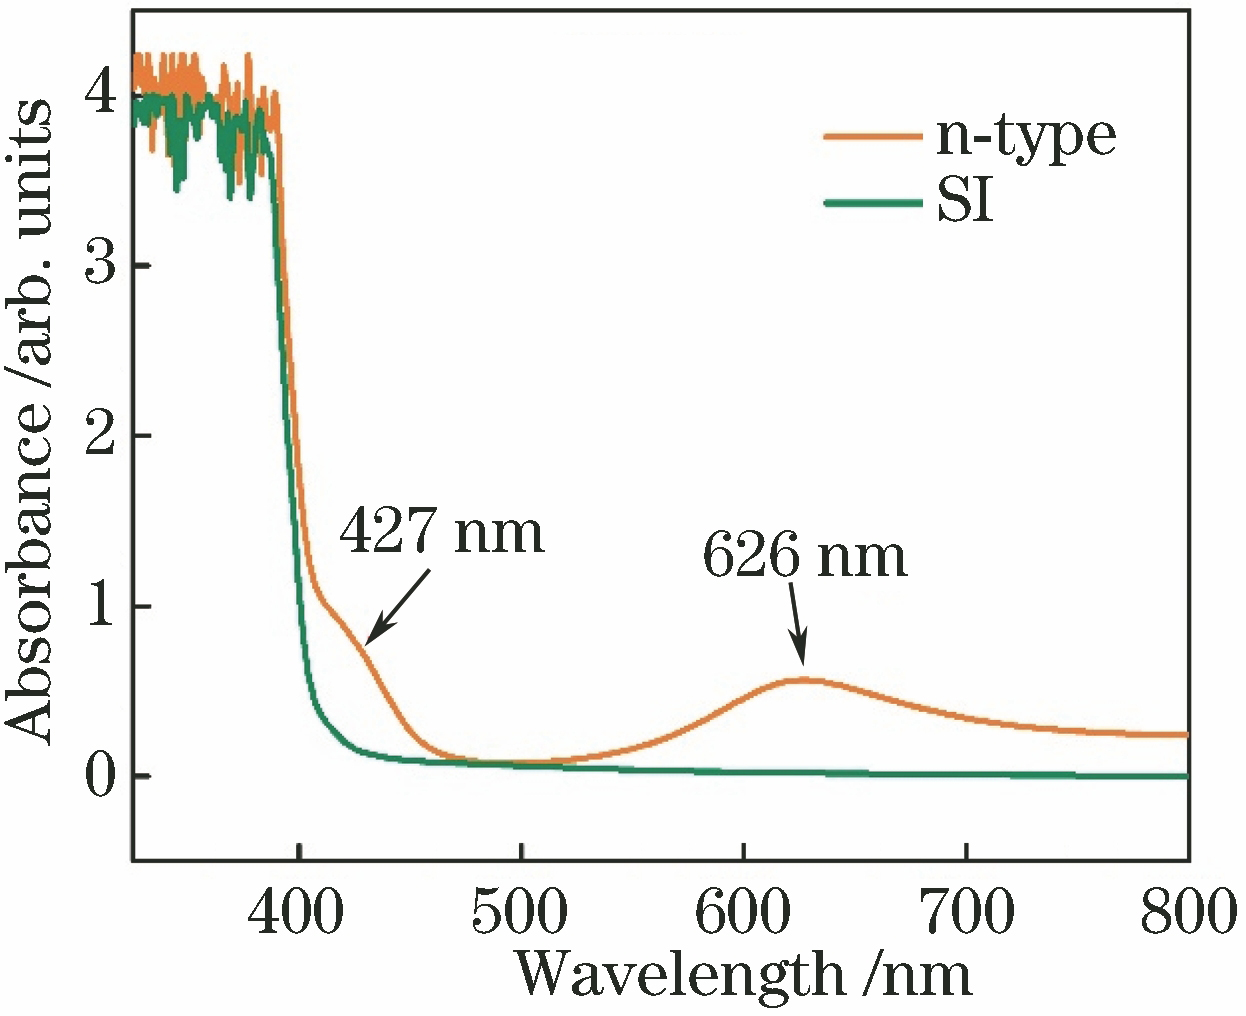 Linear absorption spectra of n-type (N-doped) and SI (V-doped) 6H-SiC wafers